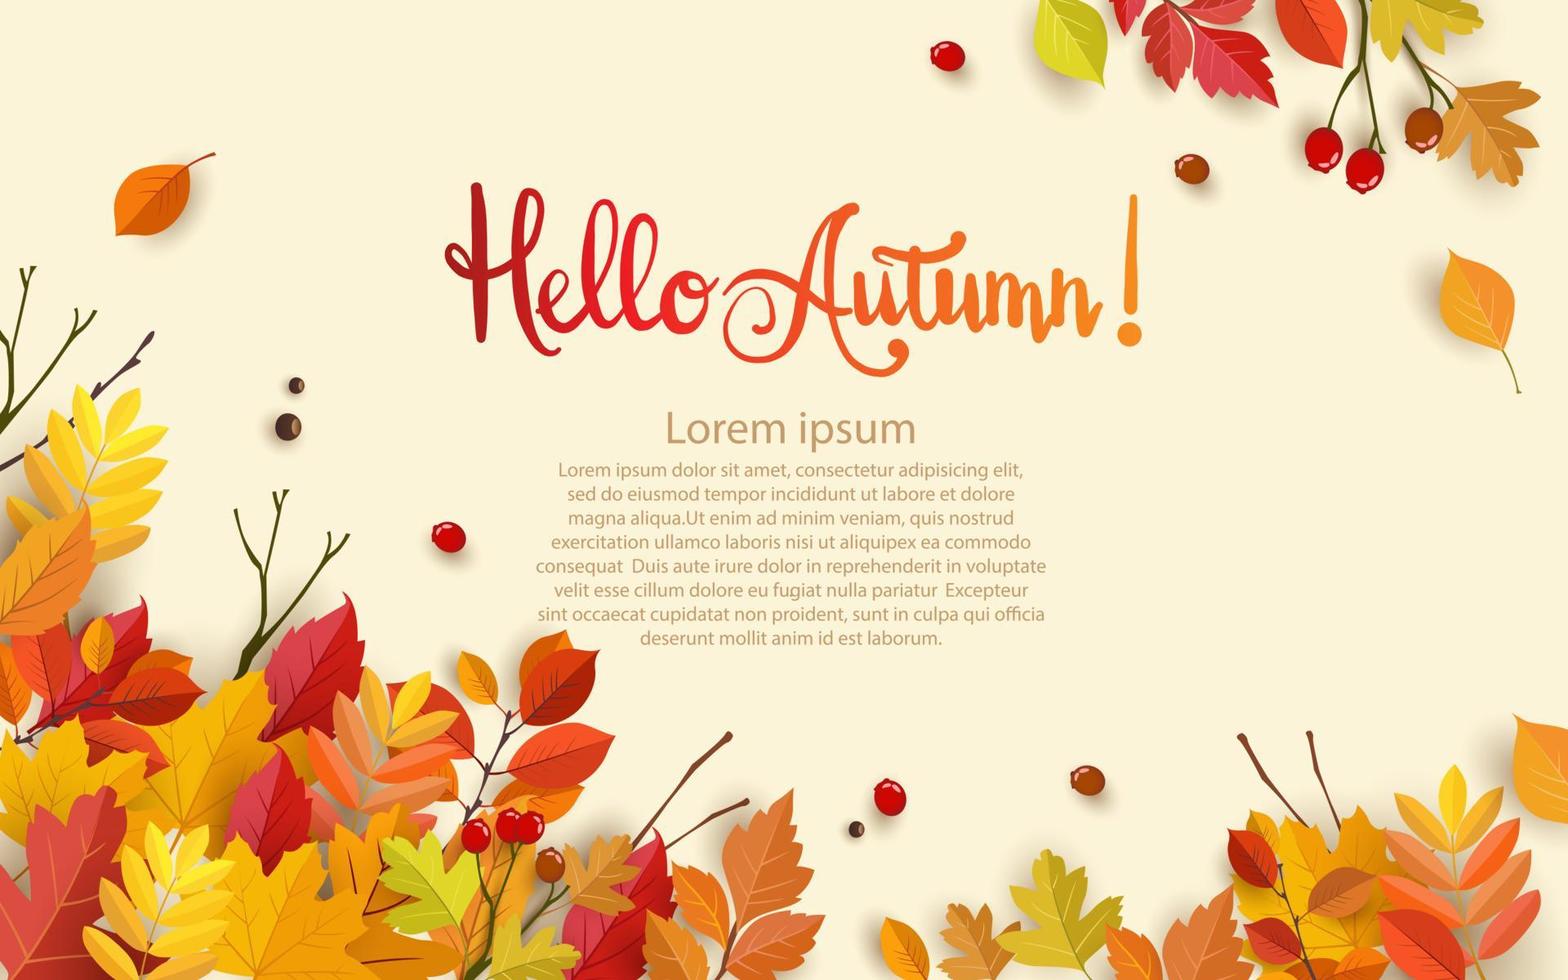 Autumn background design with leaves. background, banner or template design vector